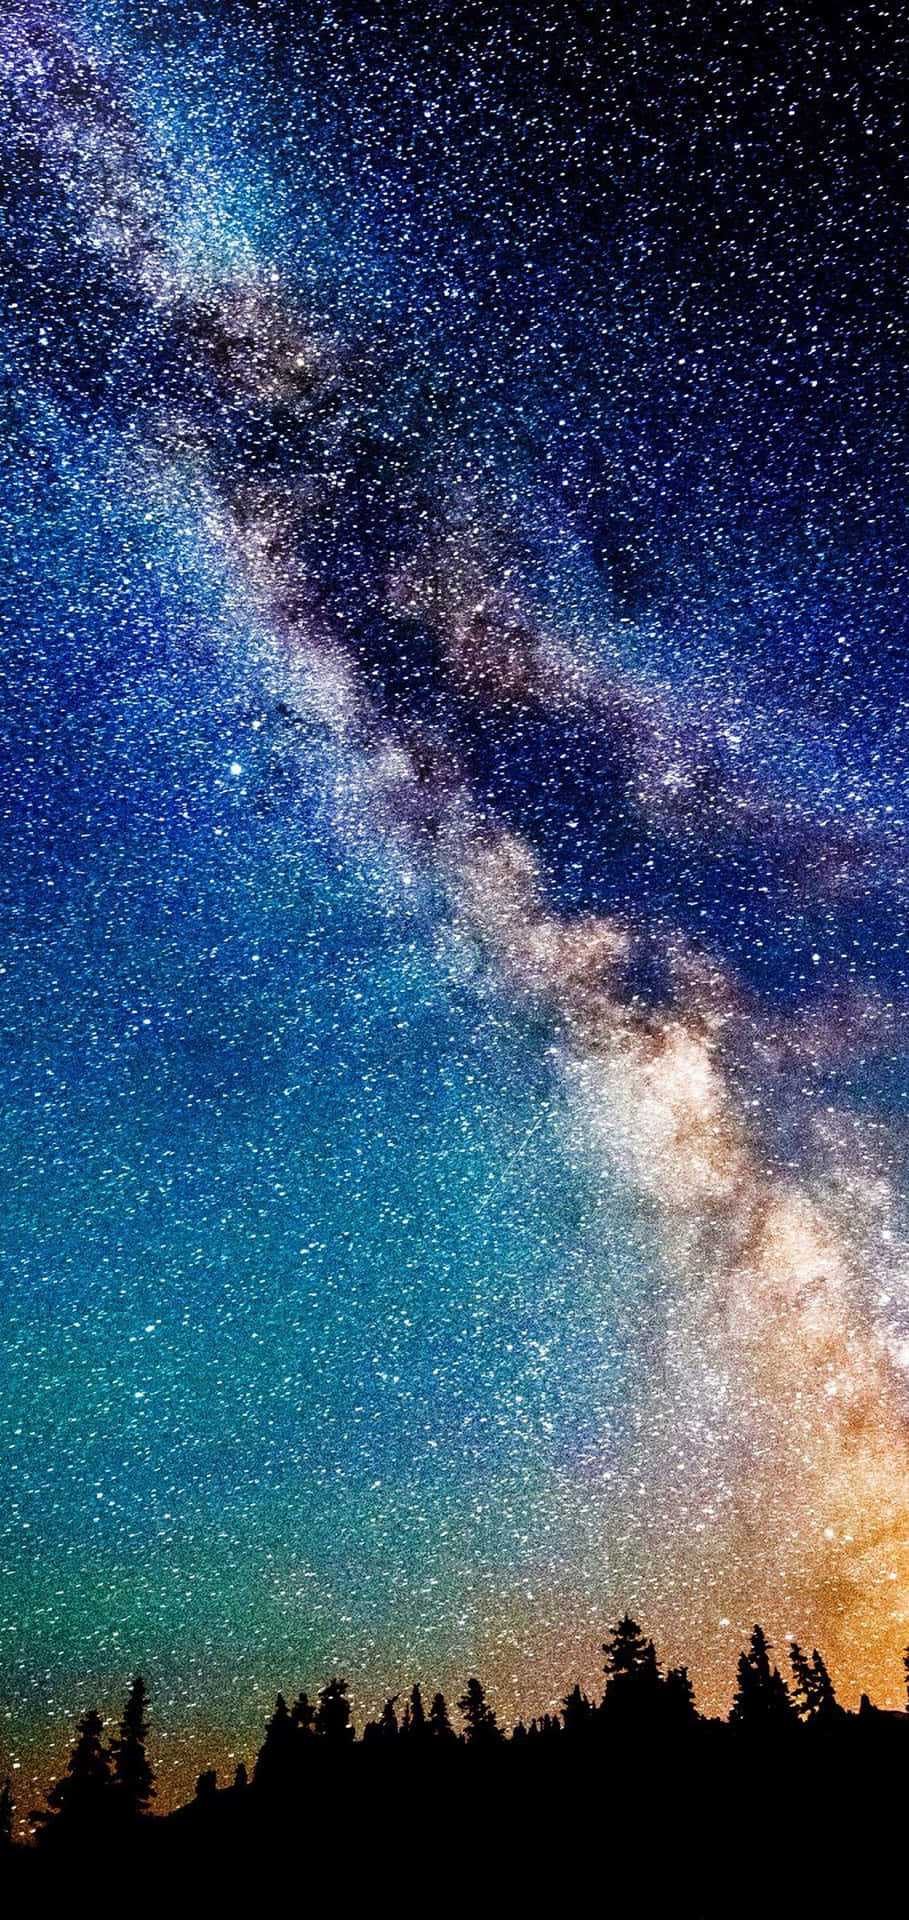 Marvel in the endless abyss of Galaxy Sky Wallpaper